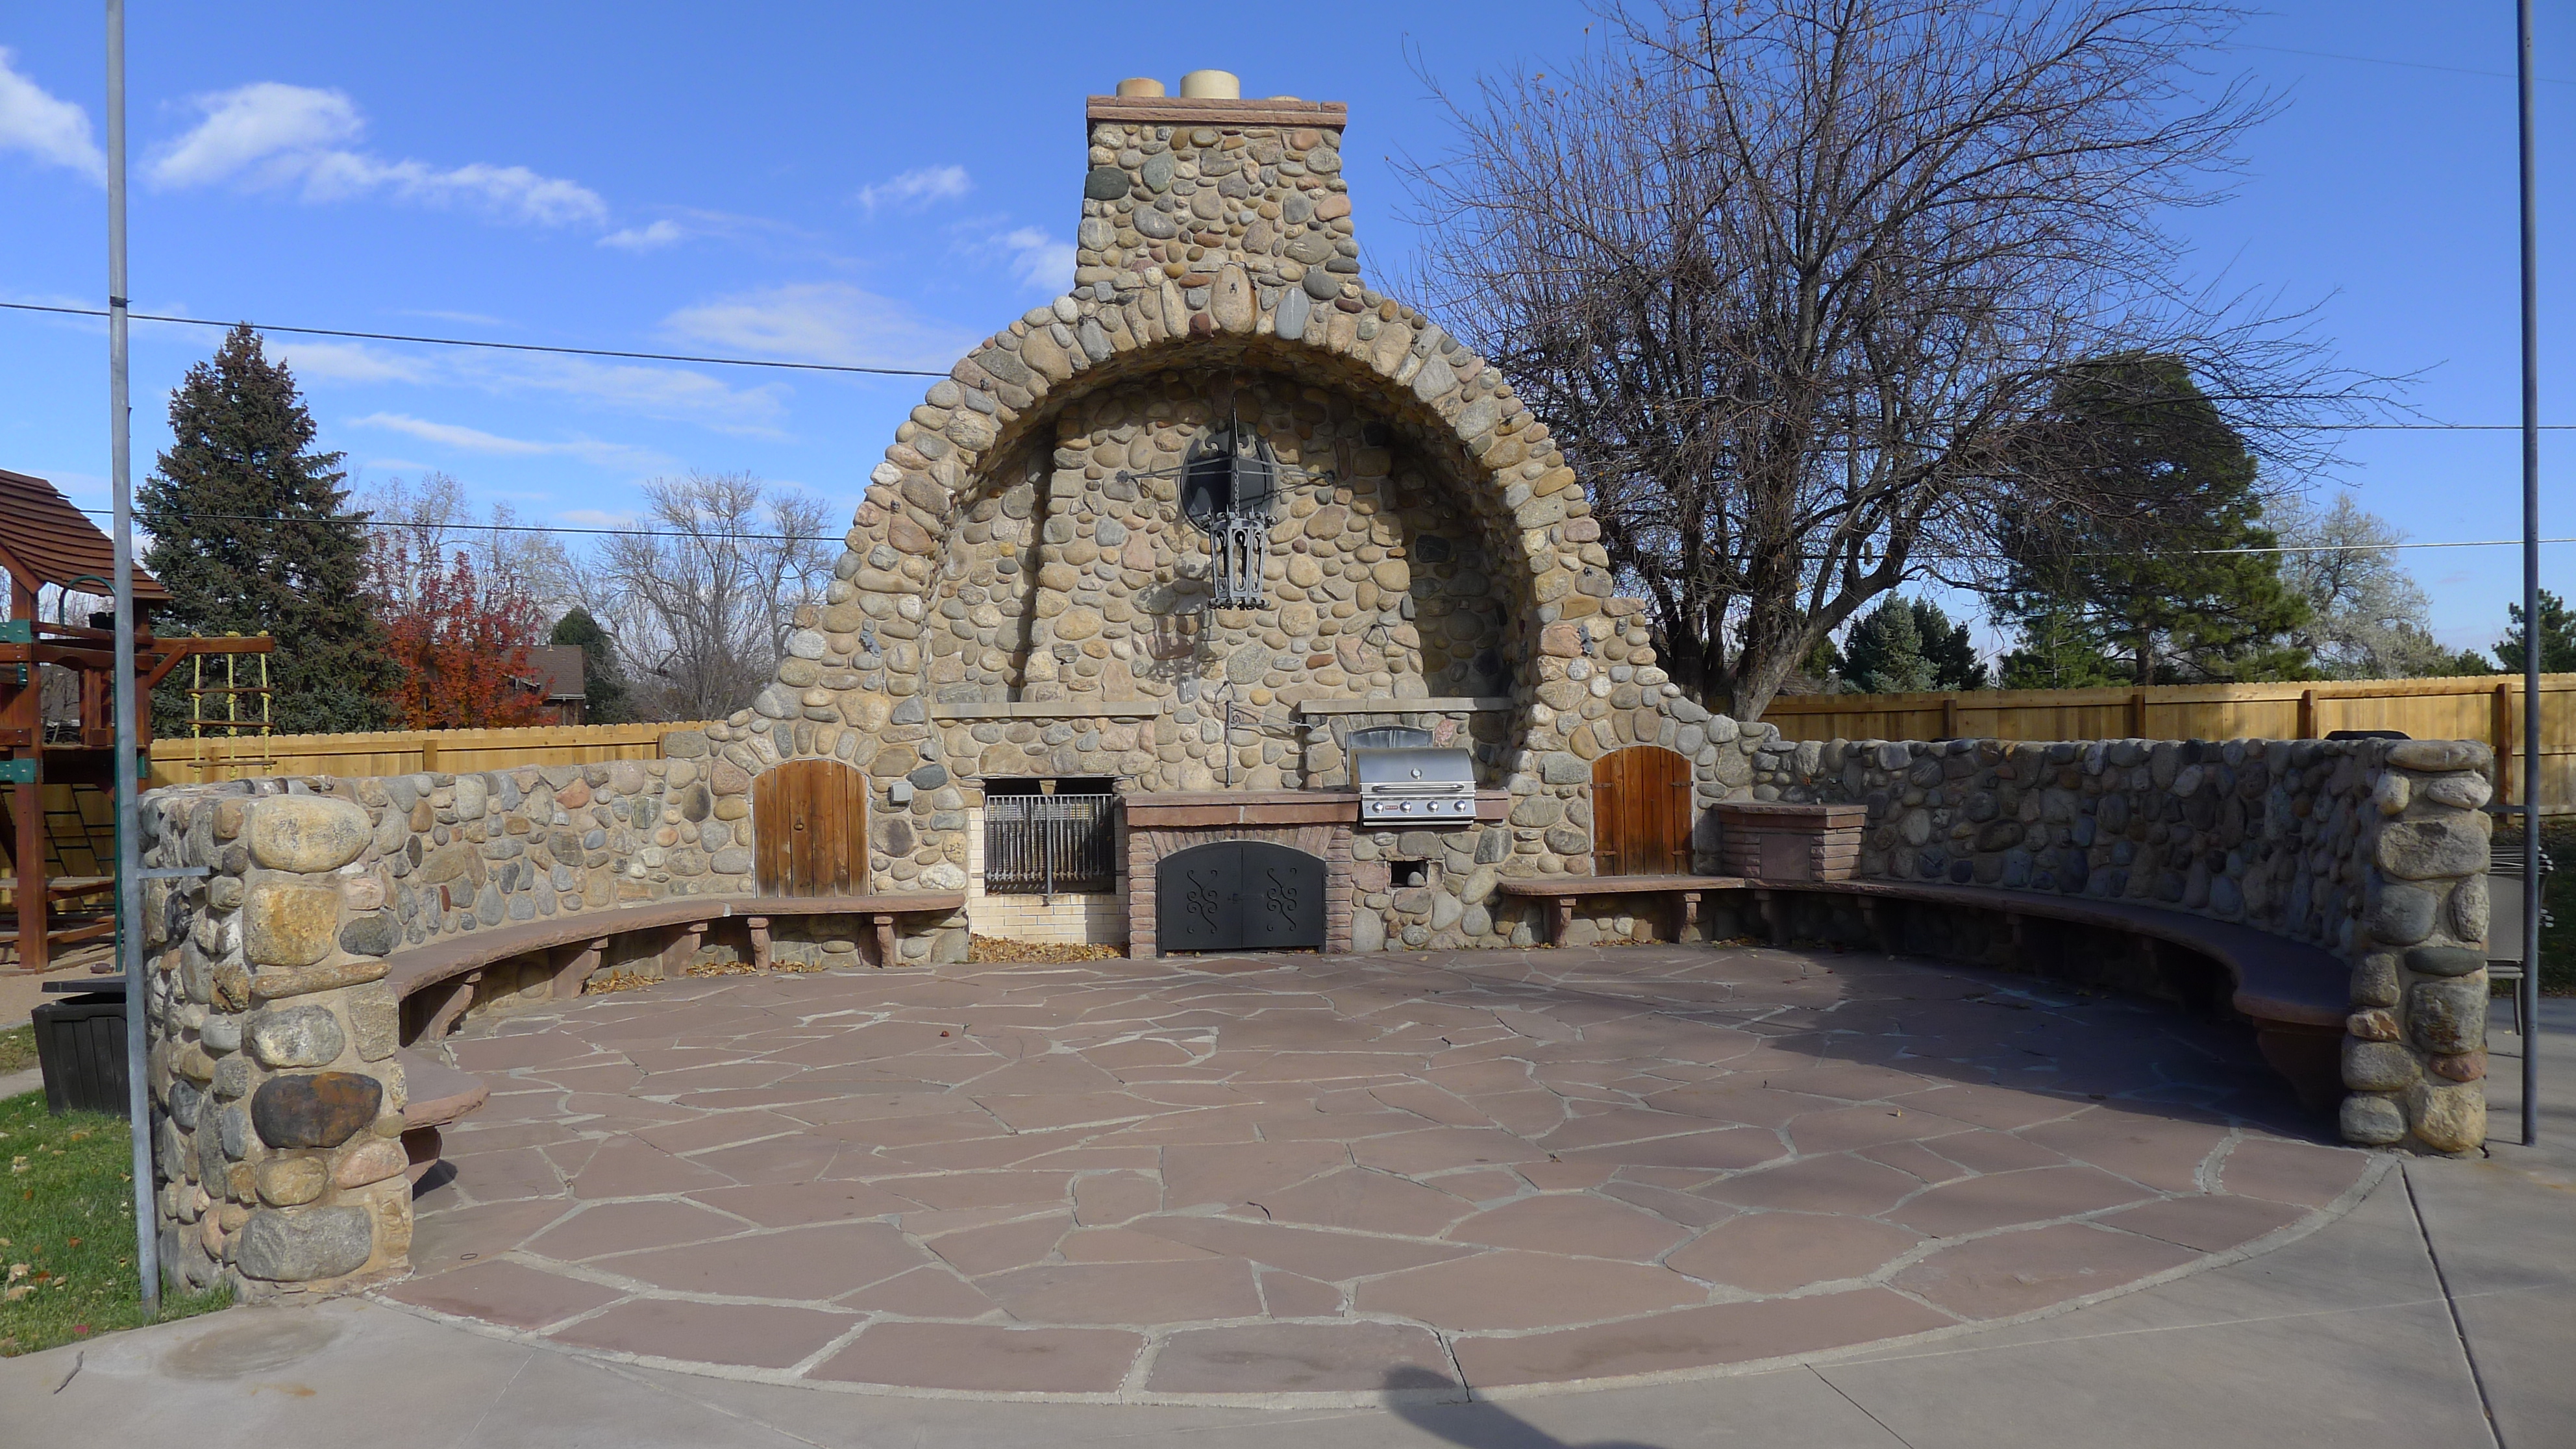 An outdoor kitchen with an unusual semi-circular shape. The kitchen is made out of stones.